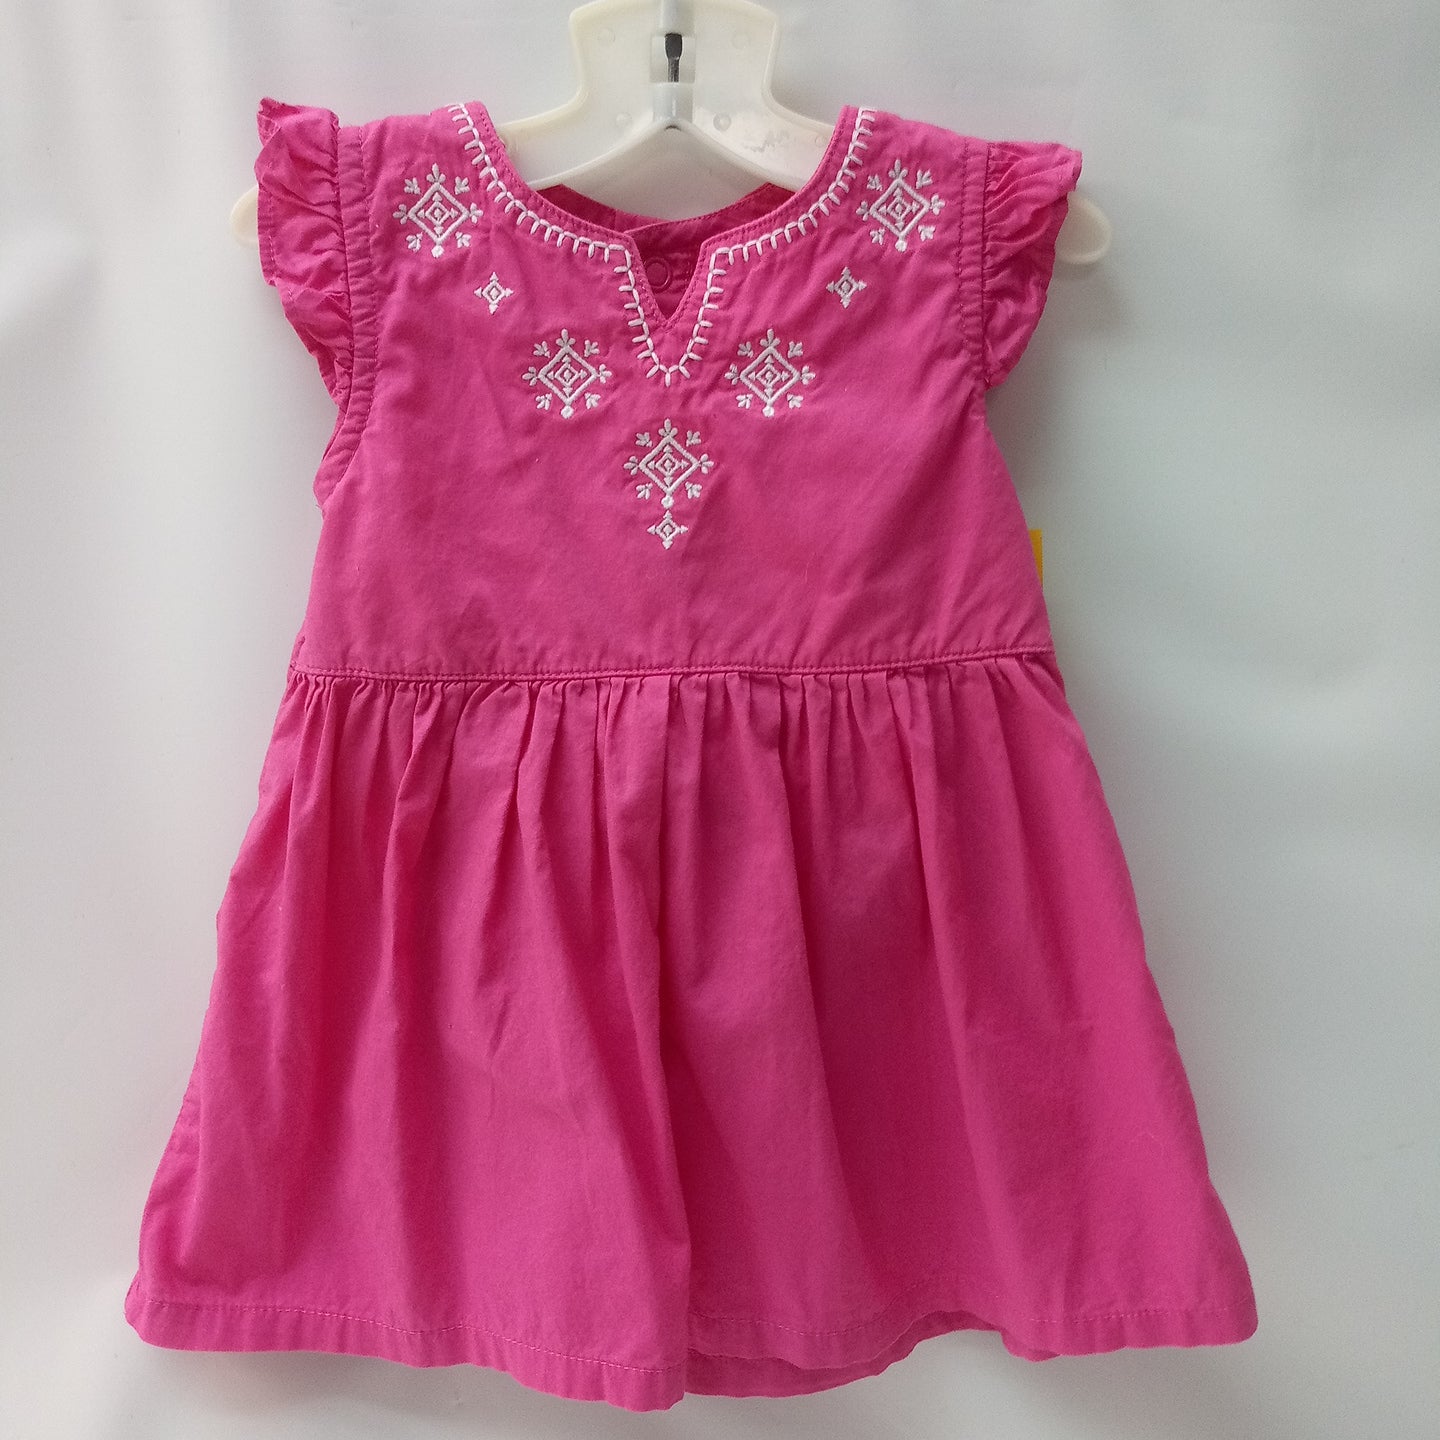 Short Sleeve Dress By Carters Size 6m